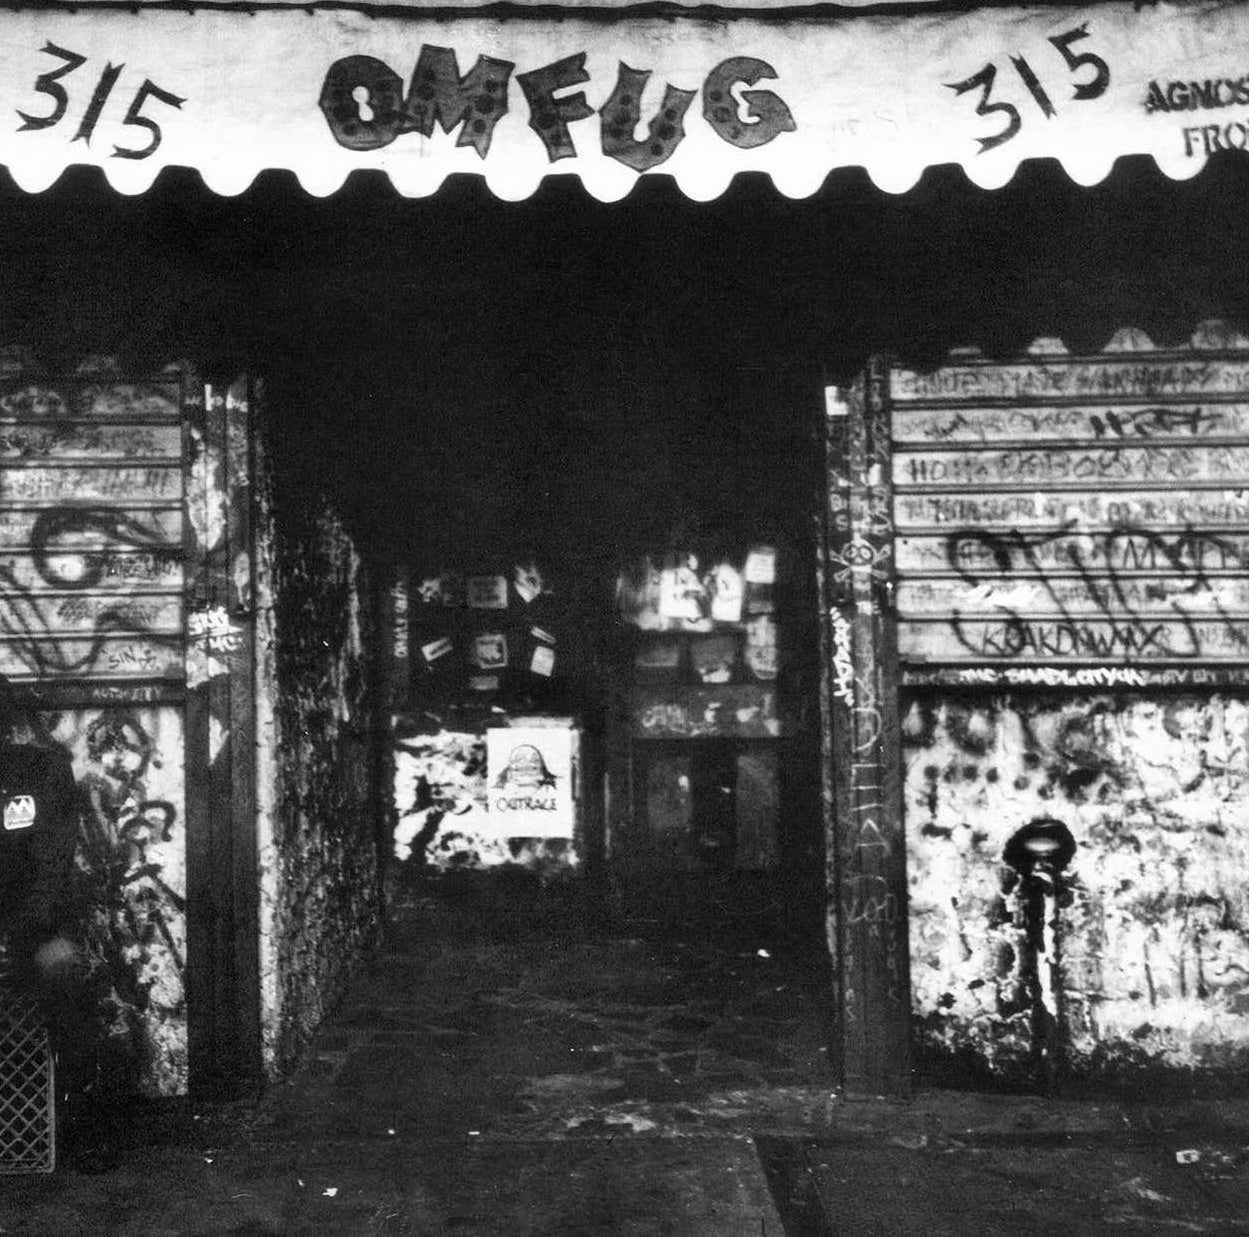 CBGB, The Birthplace of Punk - captured by heralded New York underground photographer Fernando Natalici: Manhattan, c.1982

Archival Inkjet Print.
Dimensions: 11 x 14 inches (full frame printed to the edges).
Hand signed, dated & numbered on the